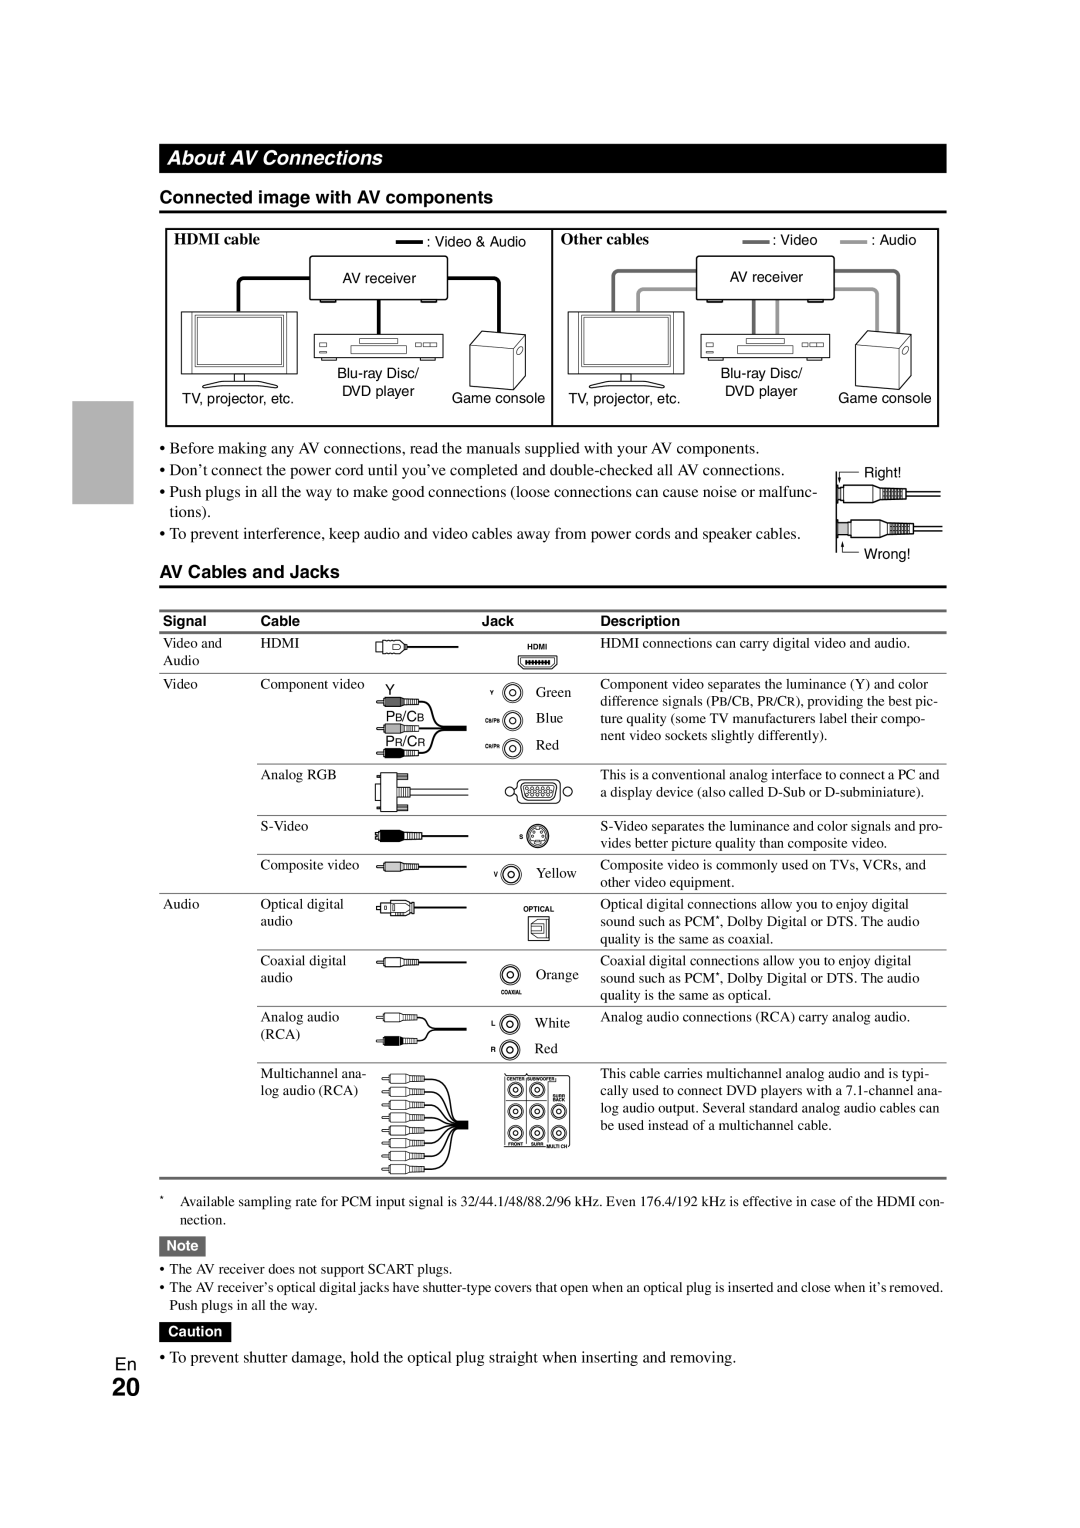 Onkyo TX-NR3008 instruction manual About AV Connections, Connected image with AV components, AV Cables and Jacks 